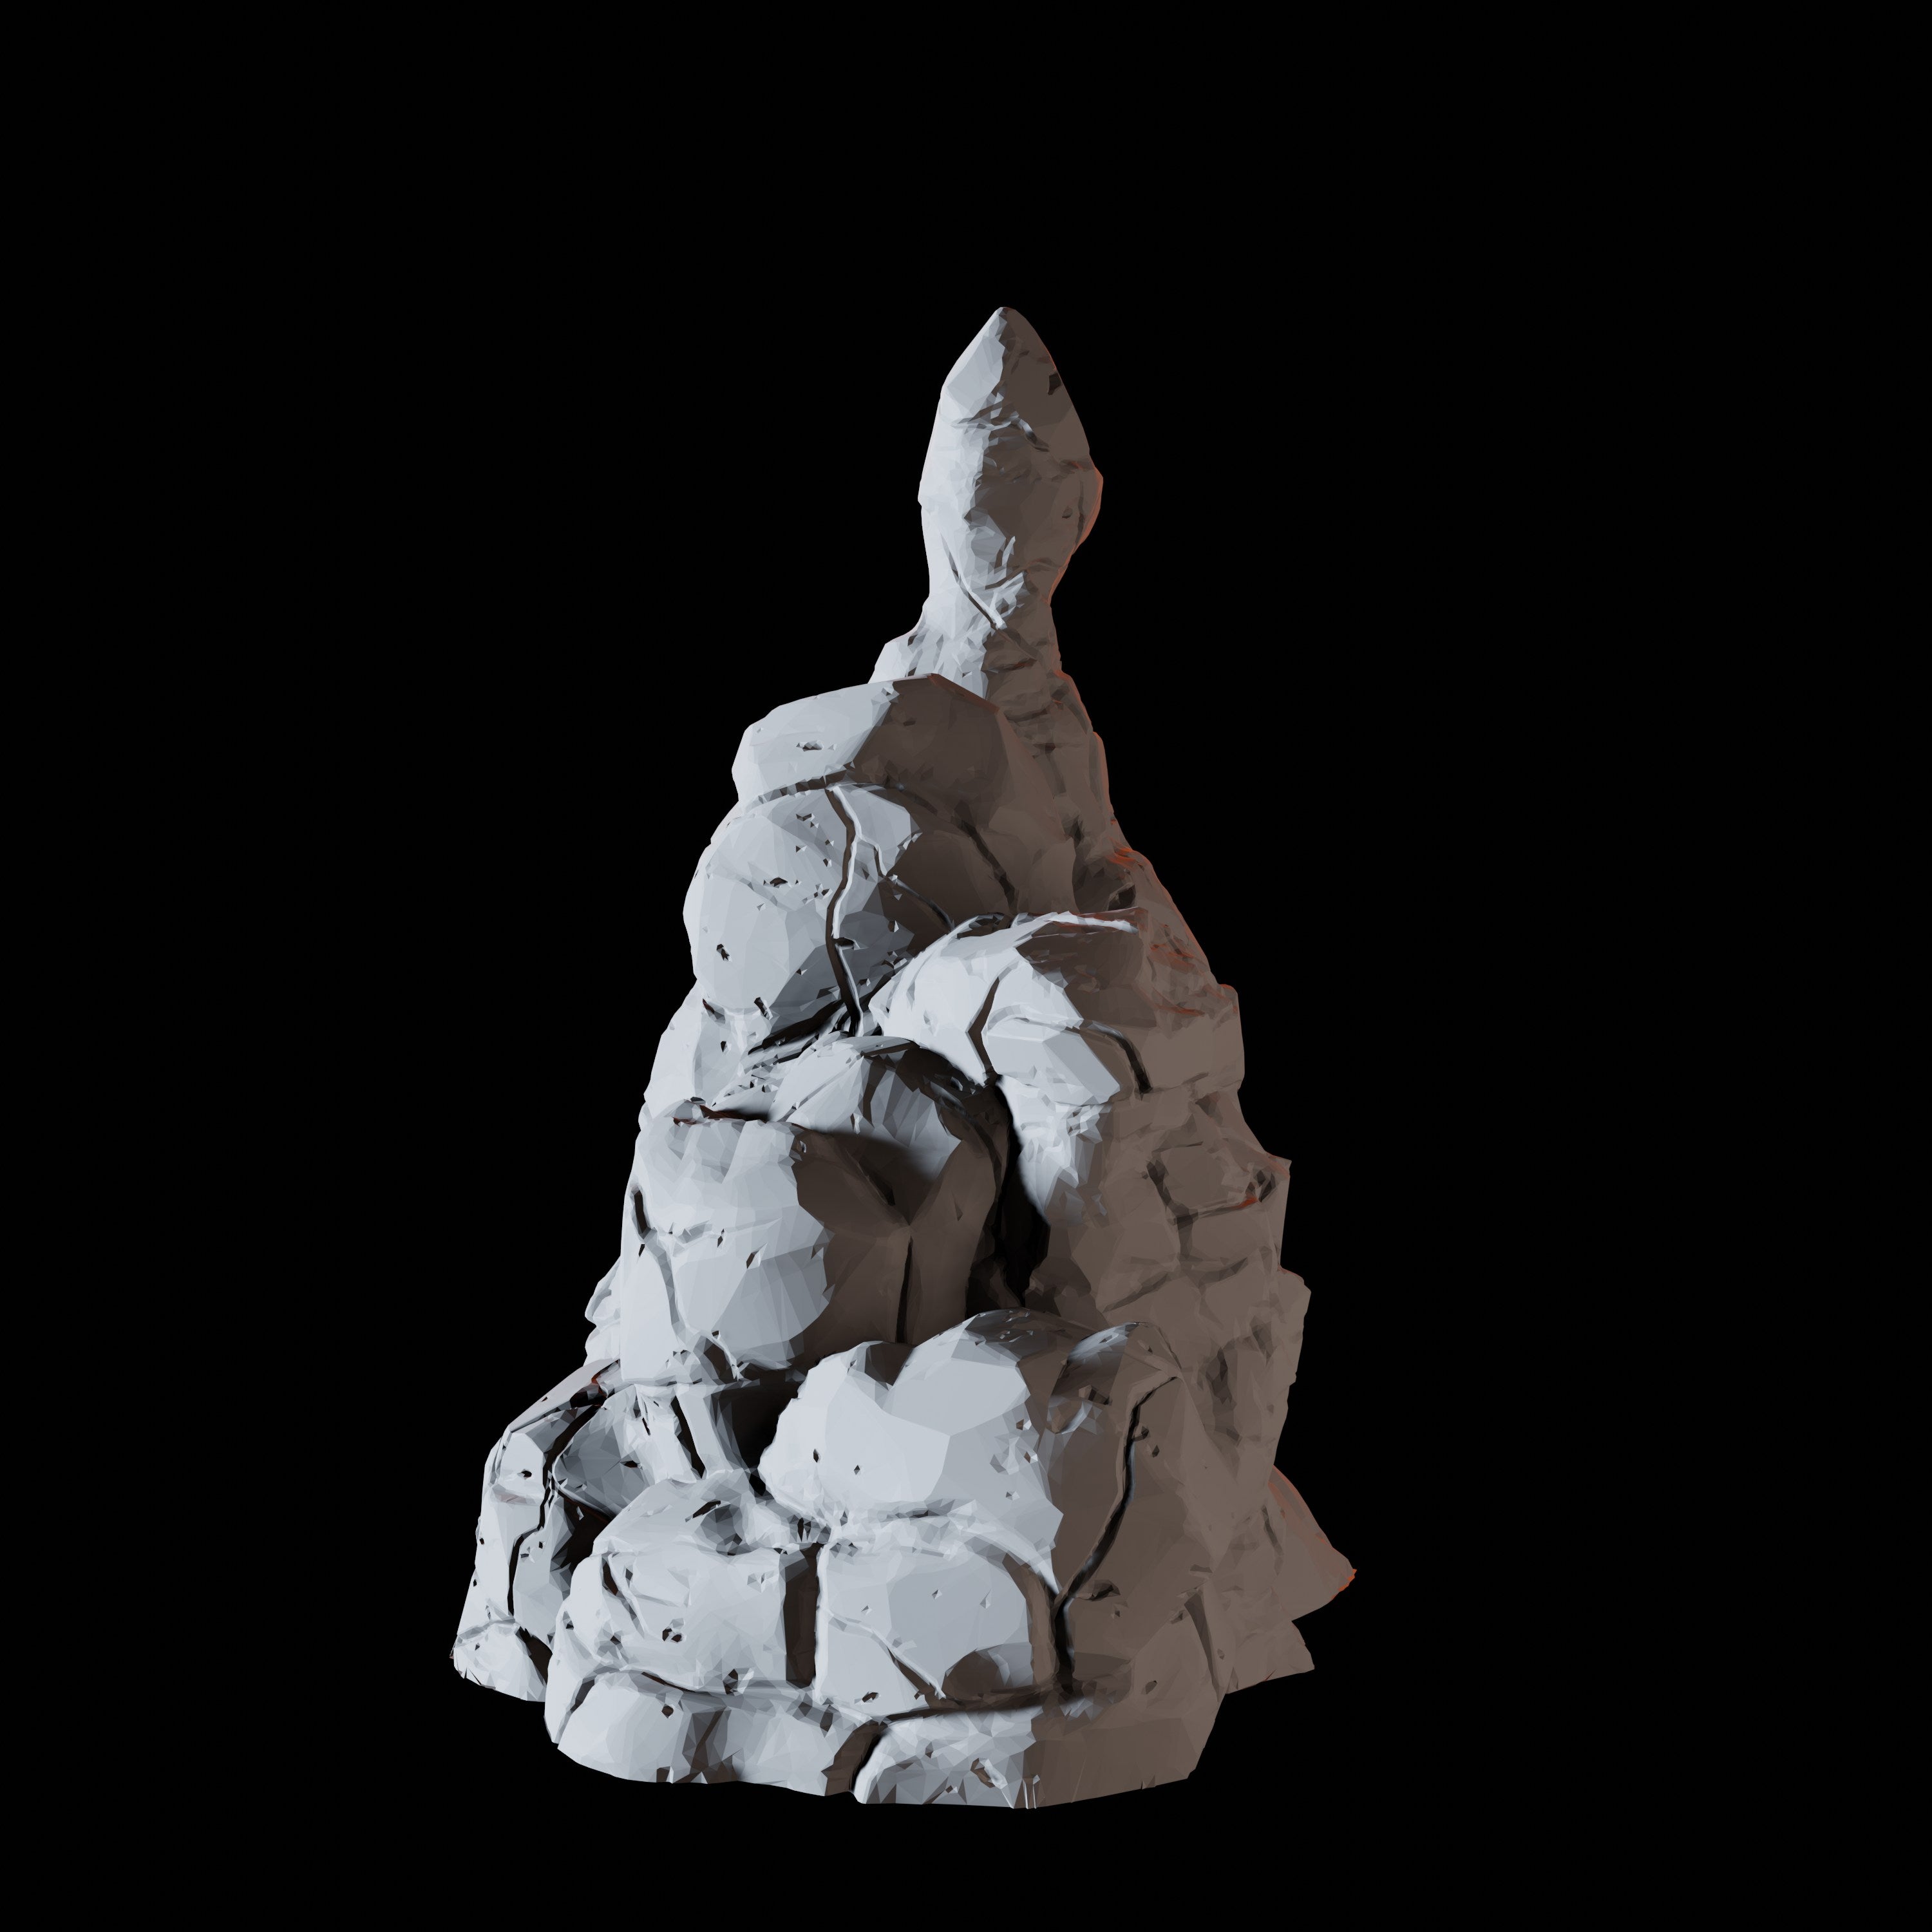 15 Cave Scatter Terrain Miniatures Miniature for Dungeons and Dragons